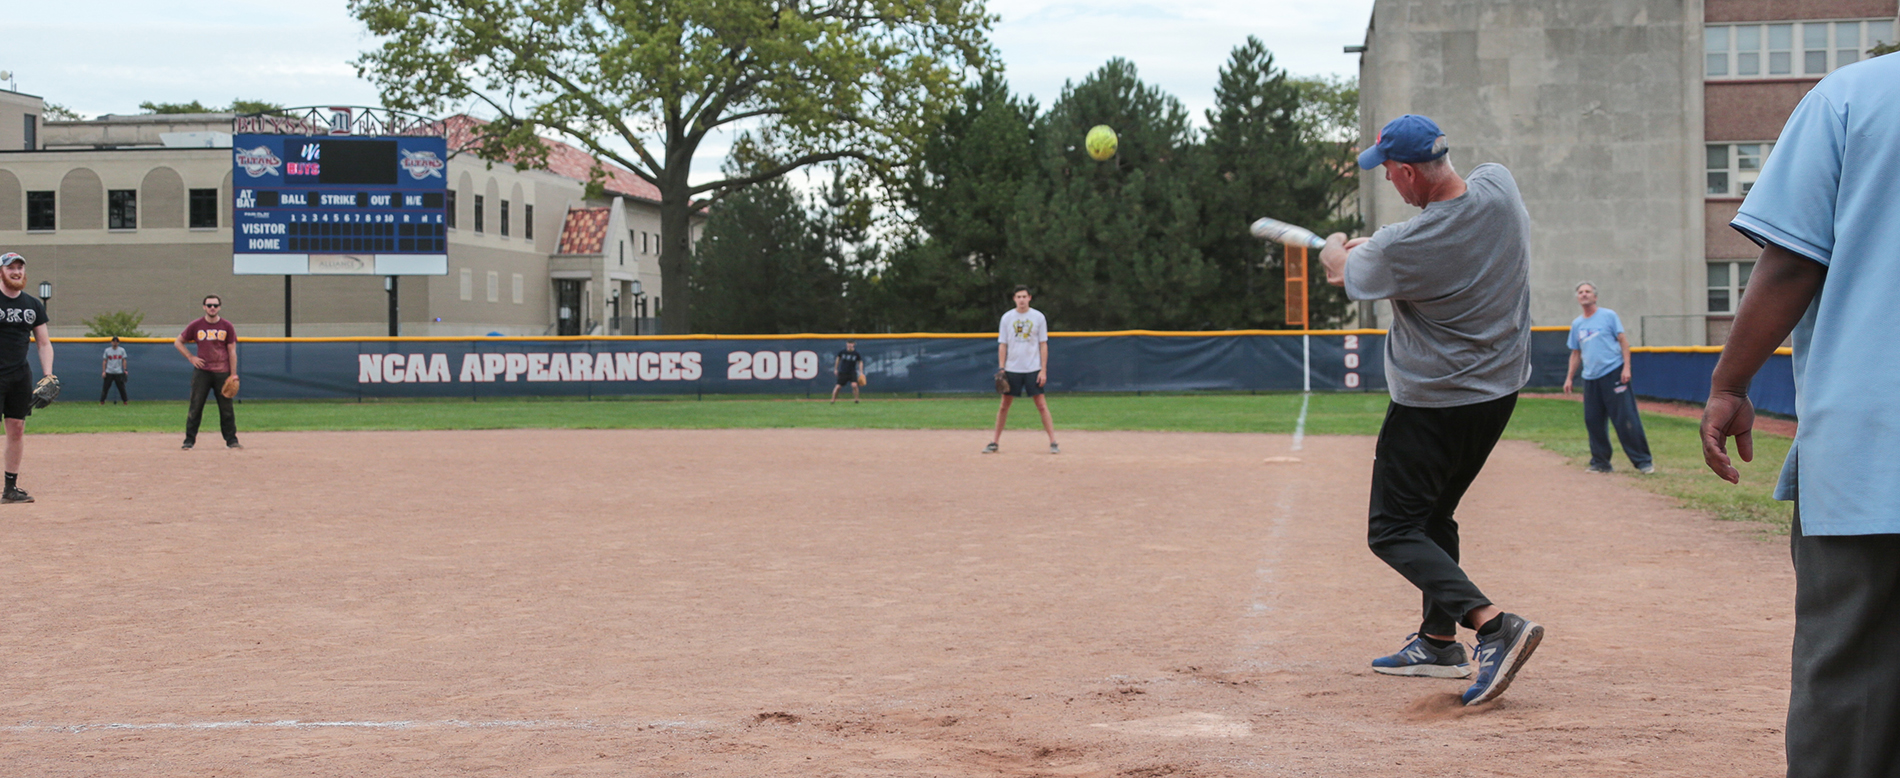 A ball is hit during the Homecoming softball tournament, held at Detroit Mercy’s Buysse Ballpark. A banner for NCAA Appearances 2019 is seen in the background on the outfield fence.